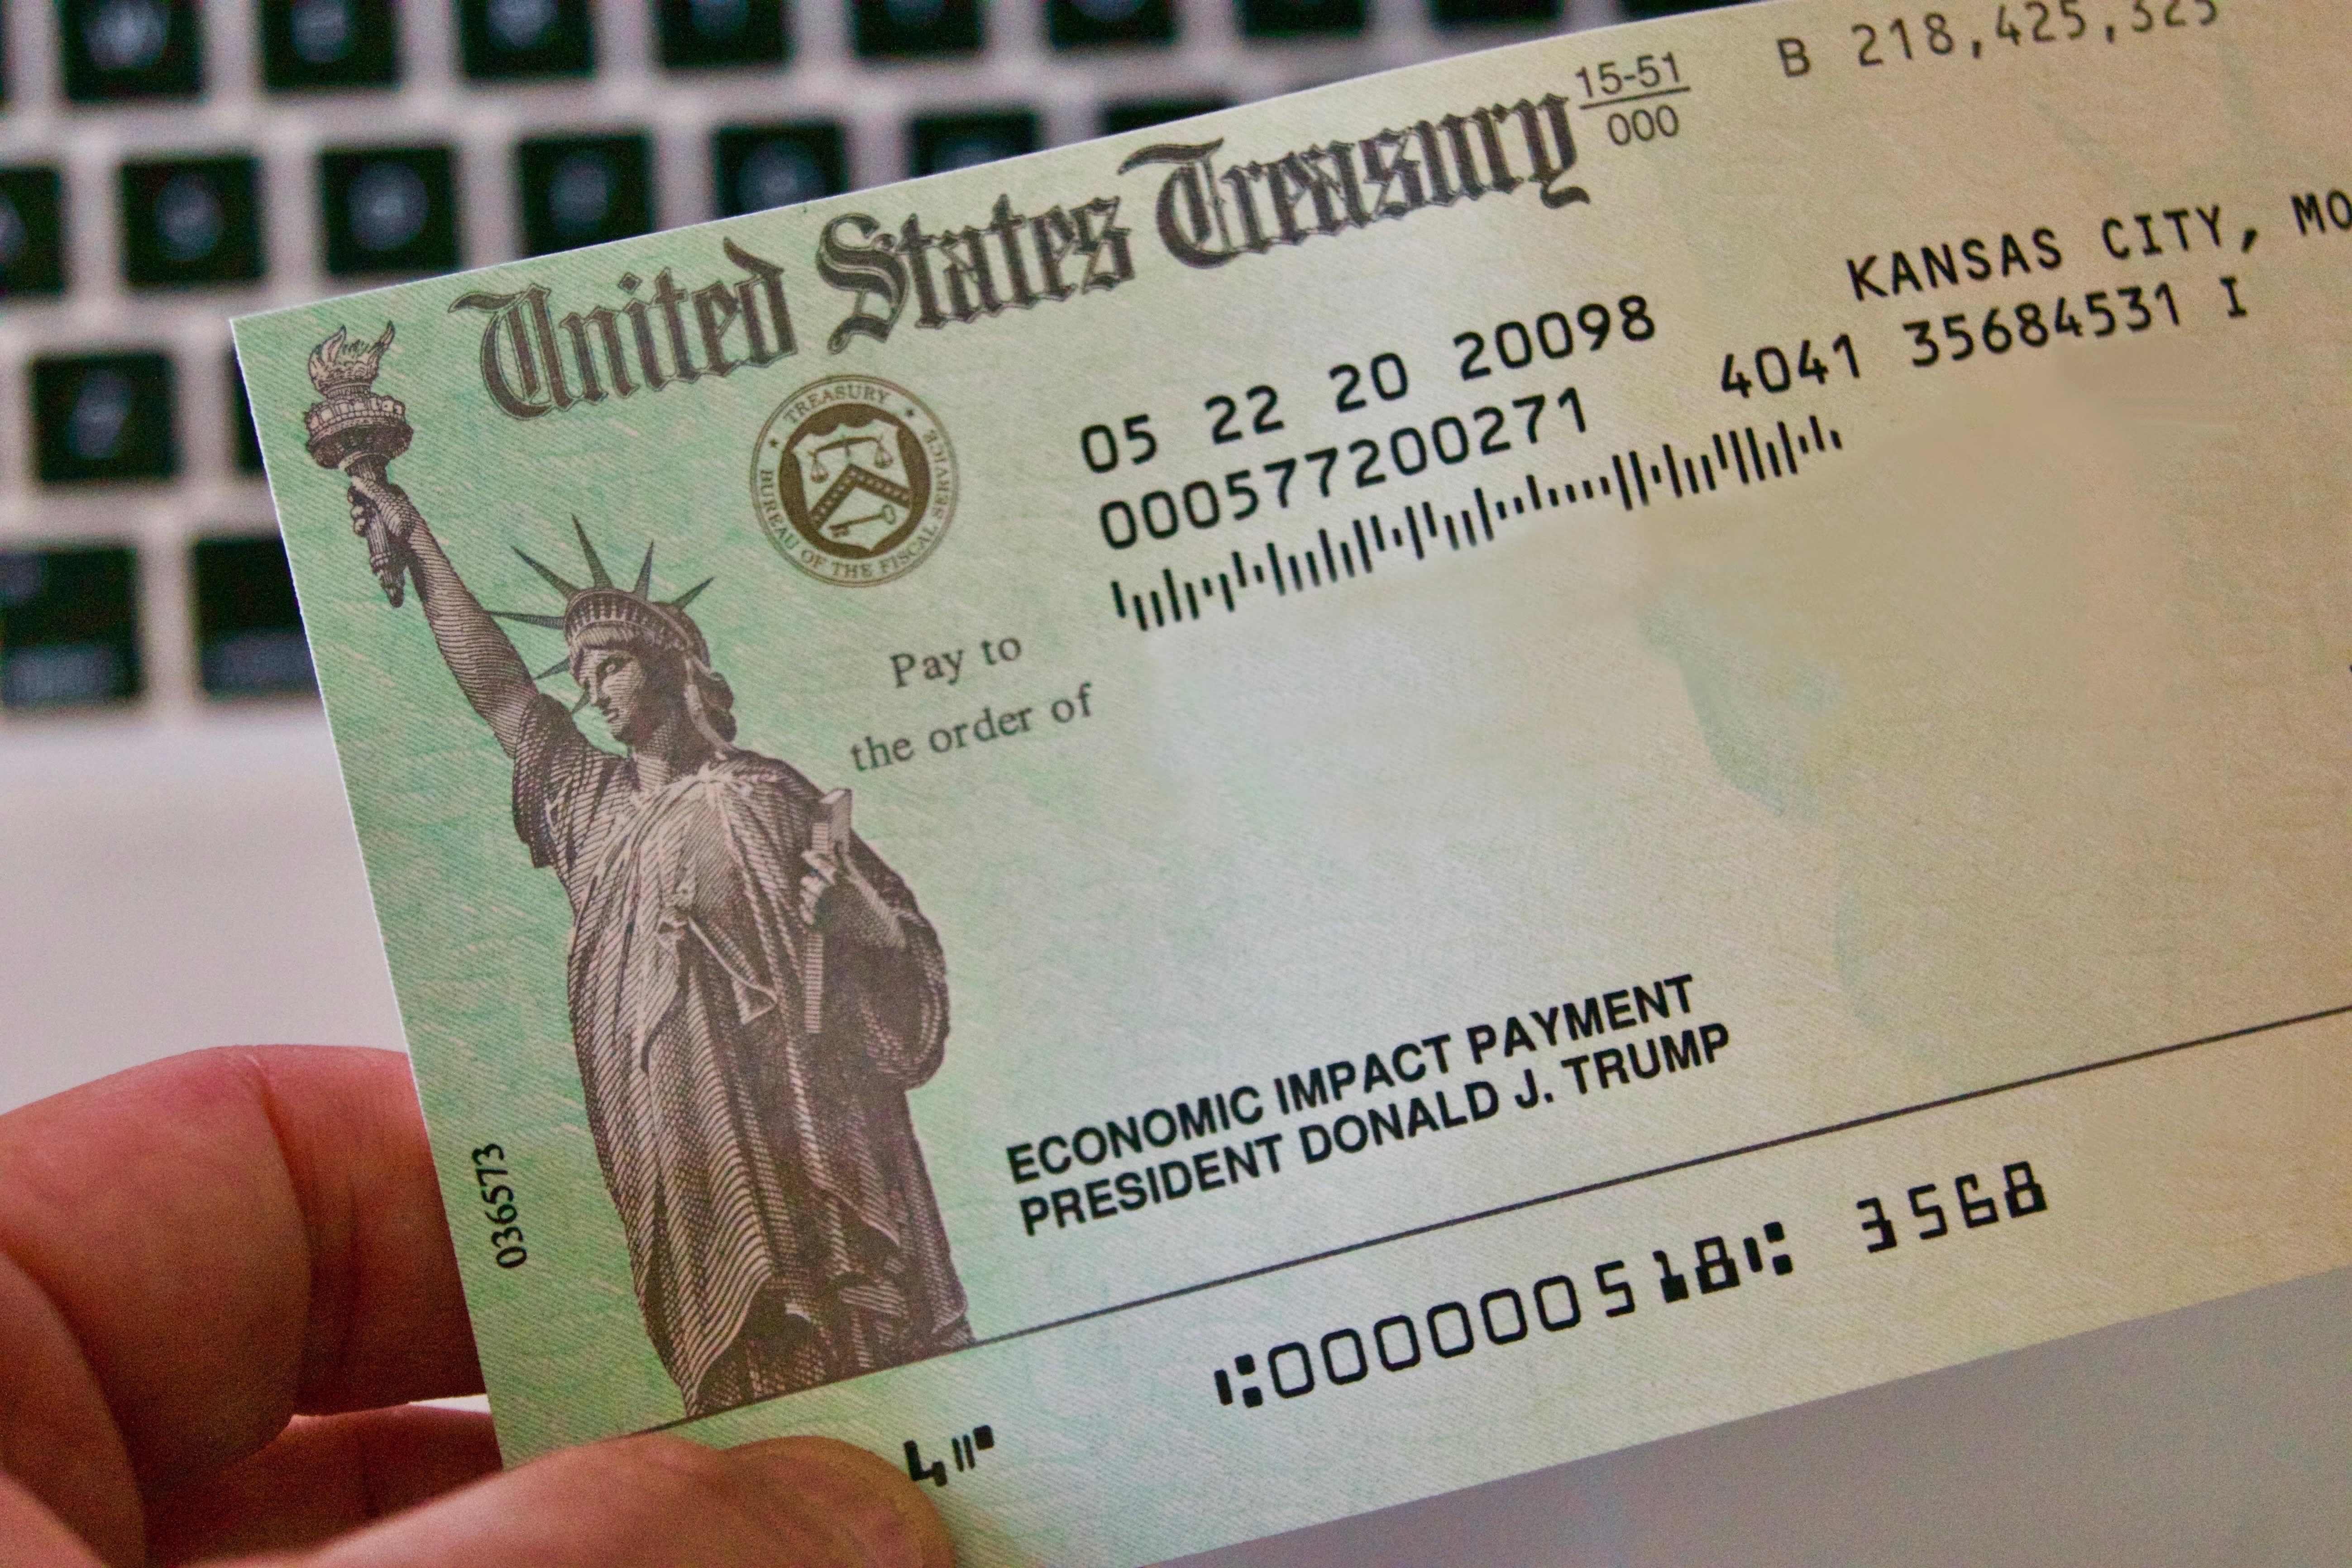 Who qualifies for a $1,400 stimulus payment under the House bill